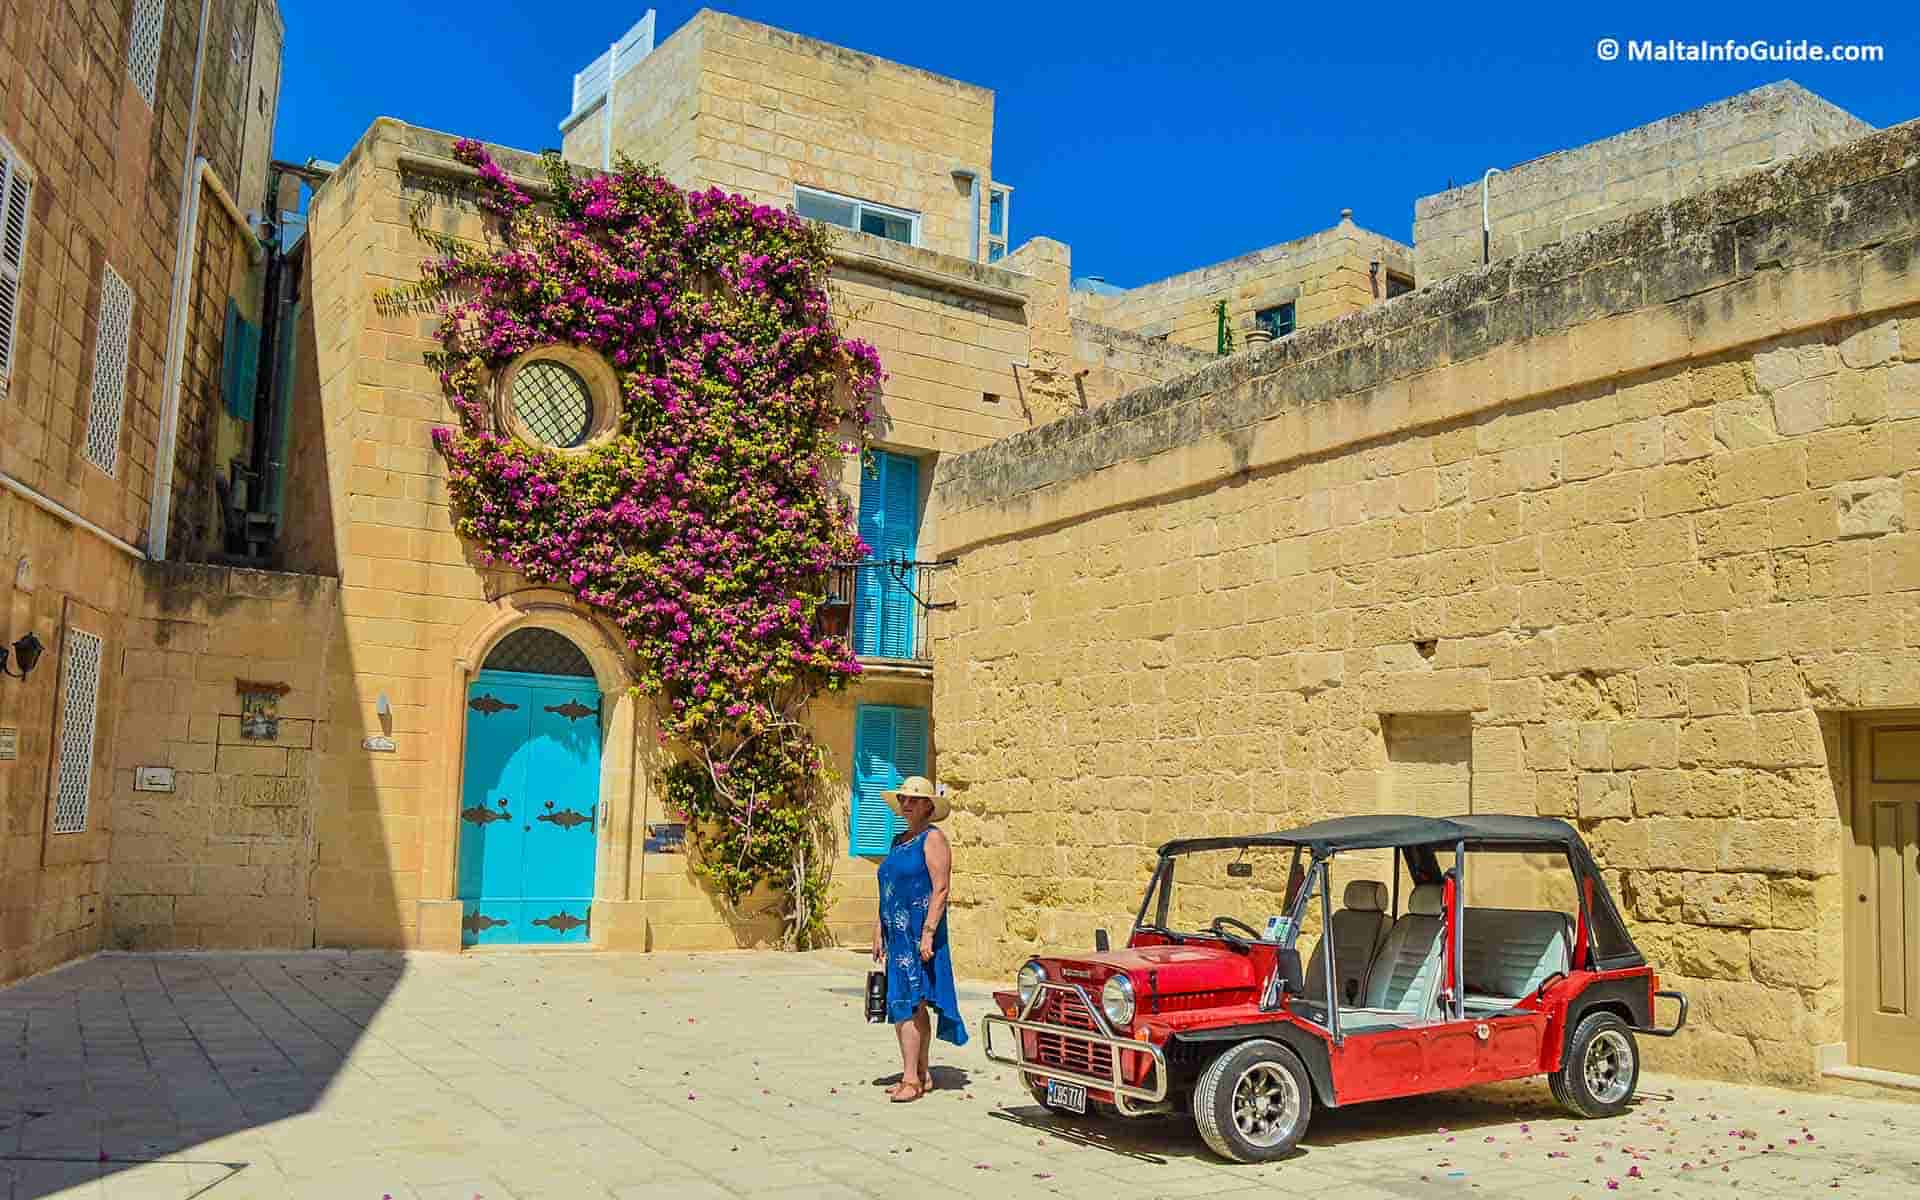 A lady posing in front of a popular Instagram sensation house in Mdina in Malta.